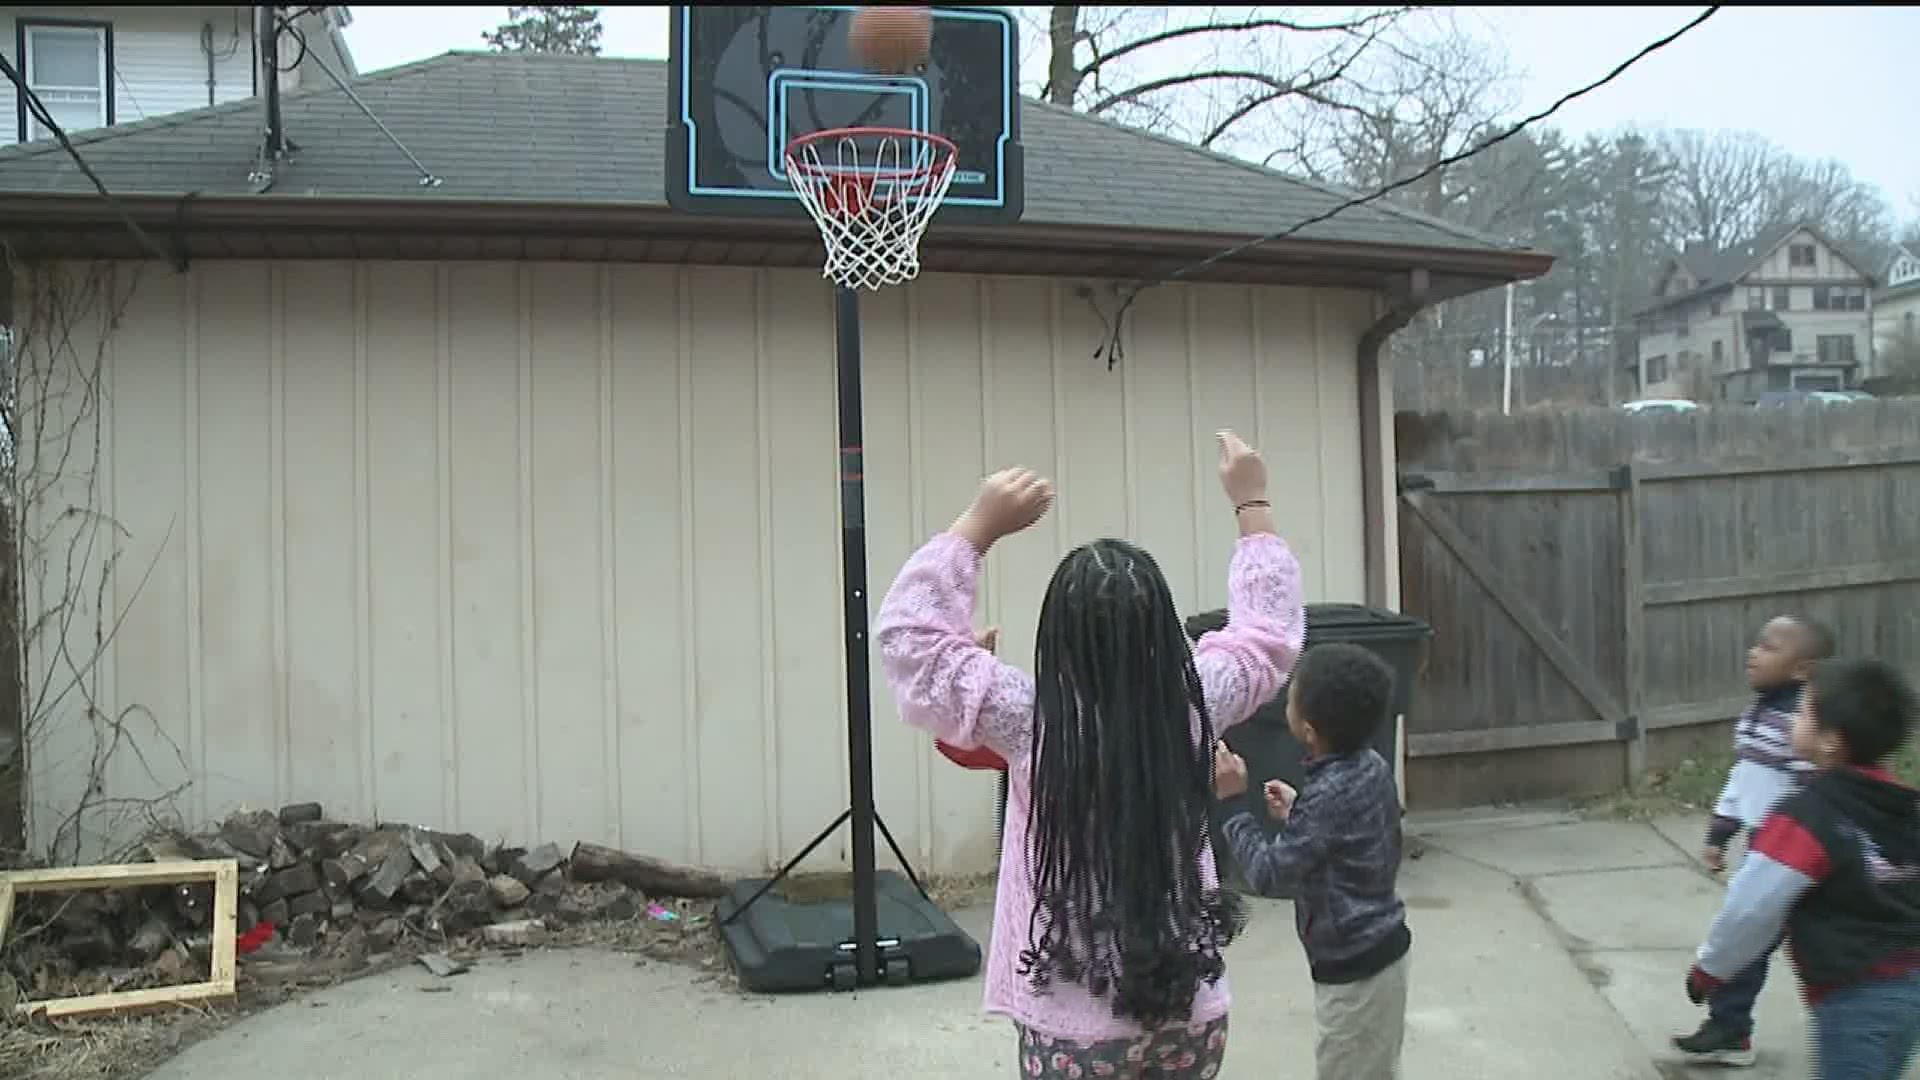 A local Rock Island mom has opened her doors two kids in the community, becoming the "mom" in their life.